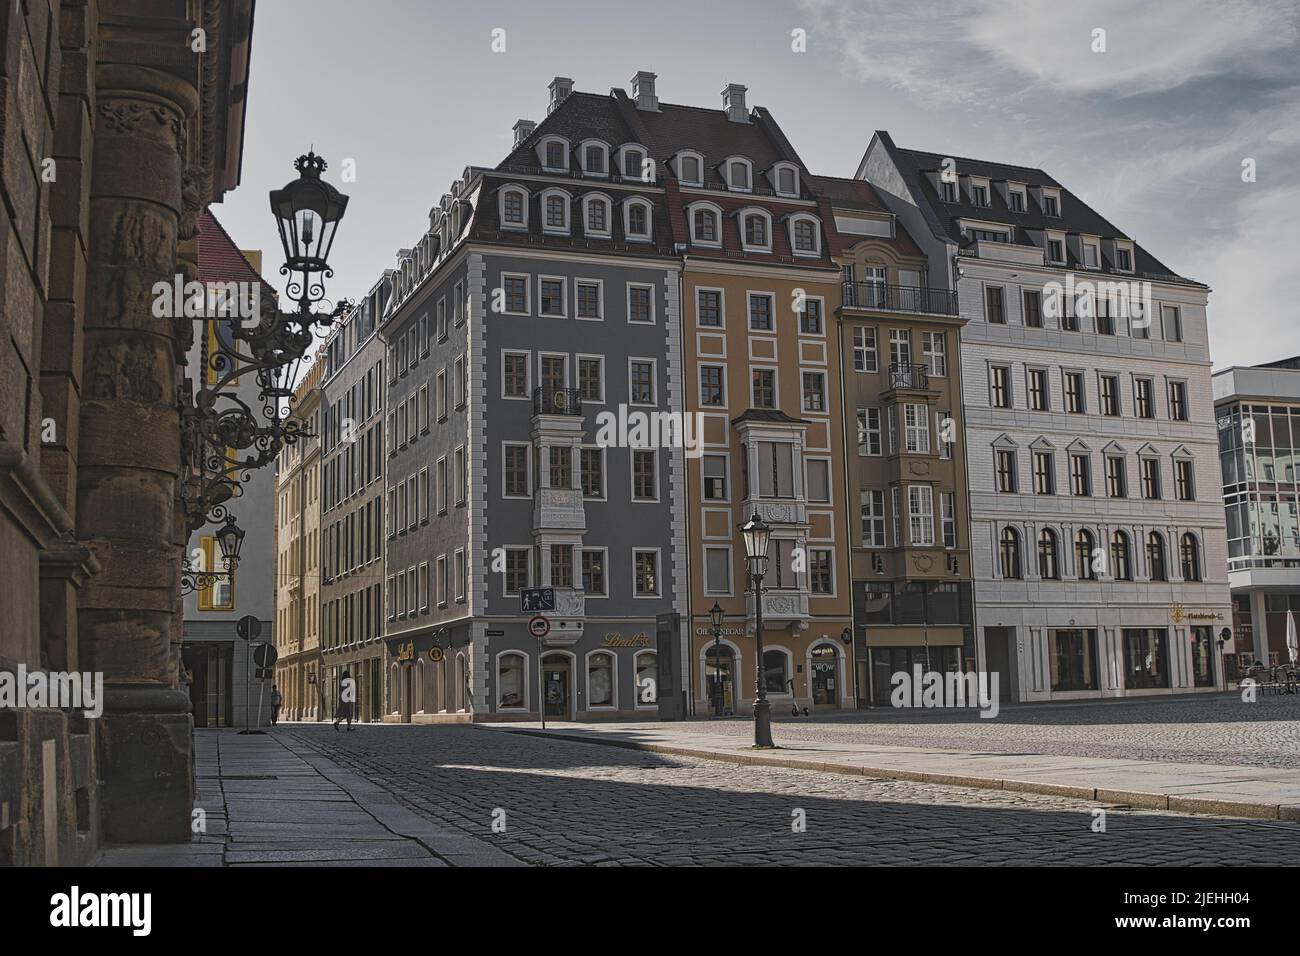 old town dresden Stock Photo